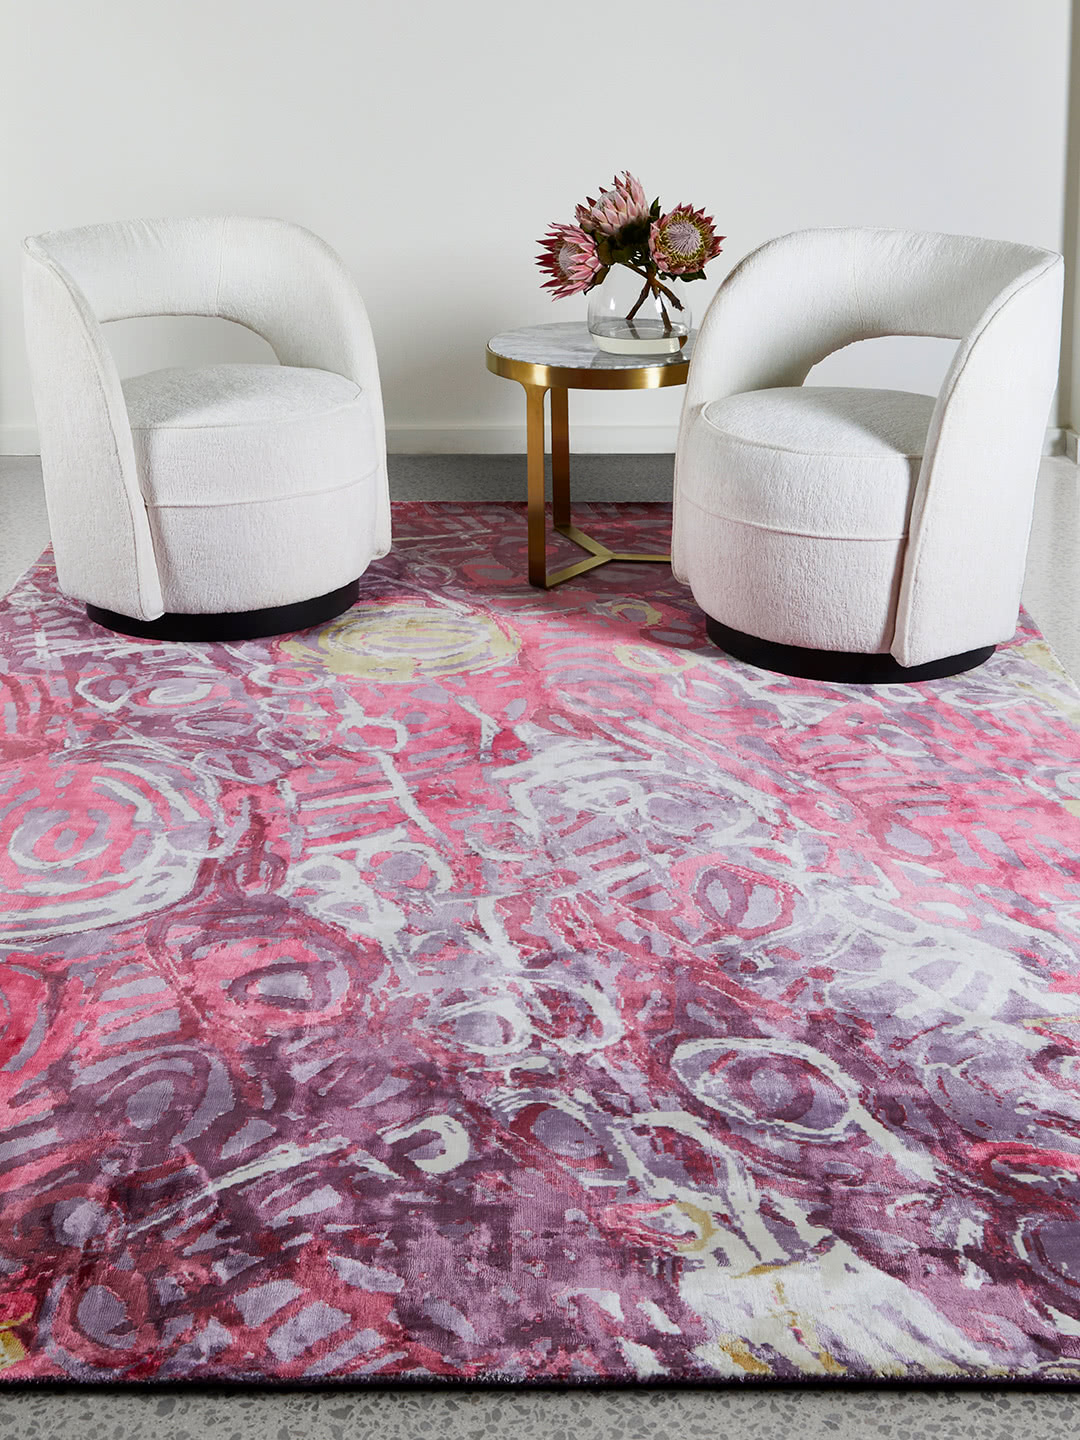 Malangka by Charmaine Pwerle - Indigenours rug design in pink and purple colours - lifestyle image